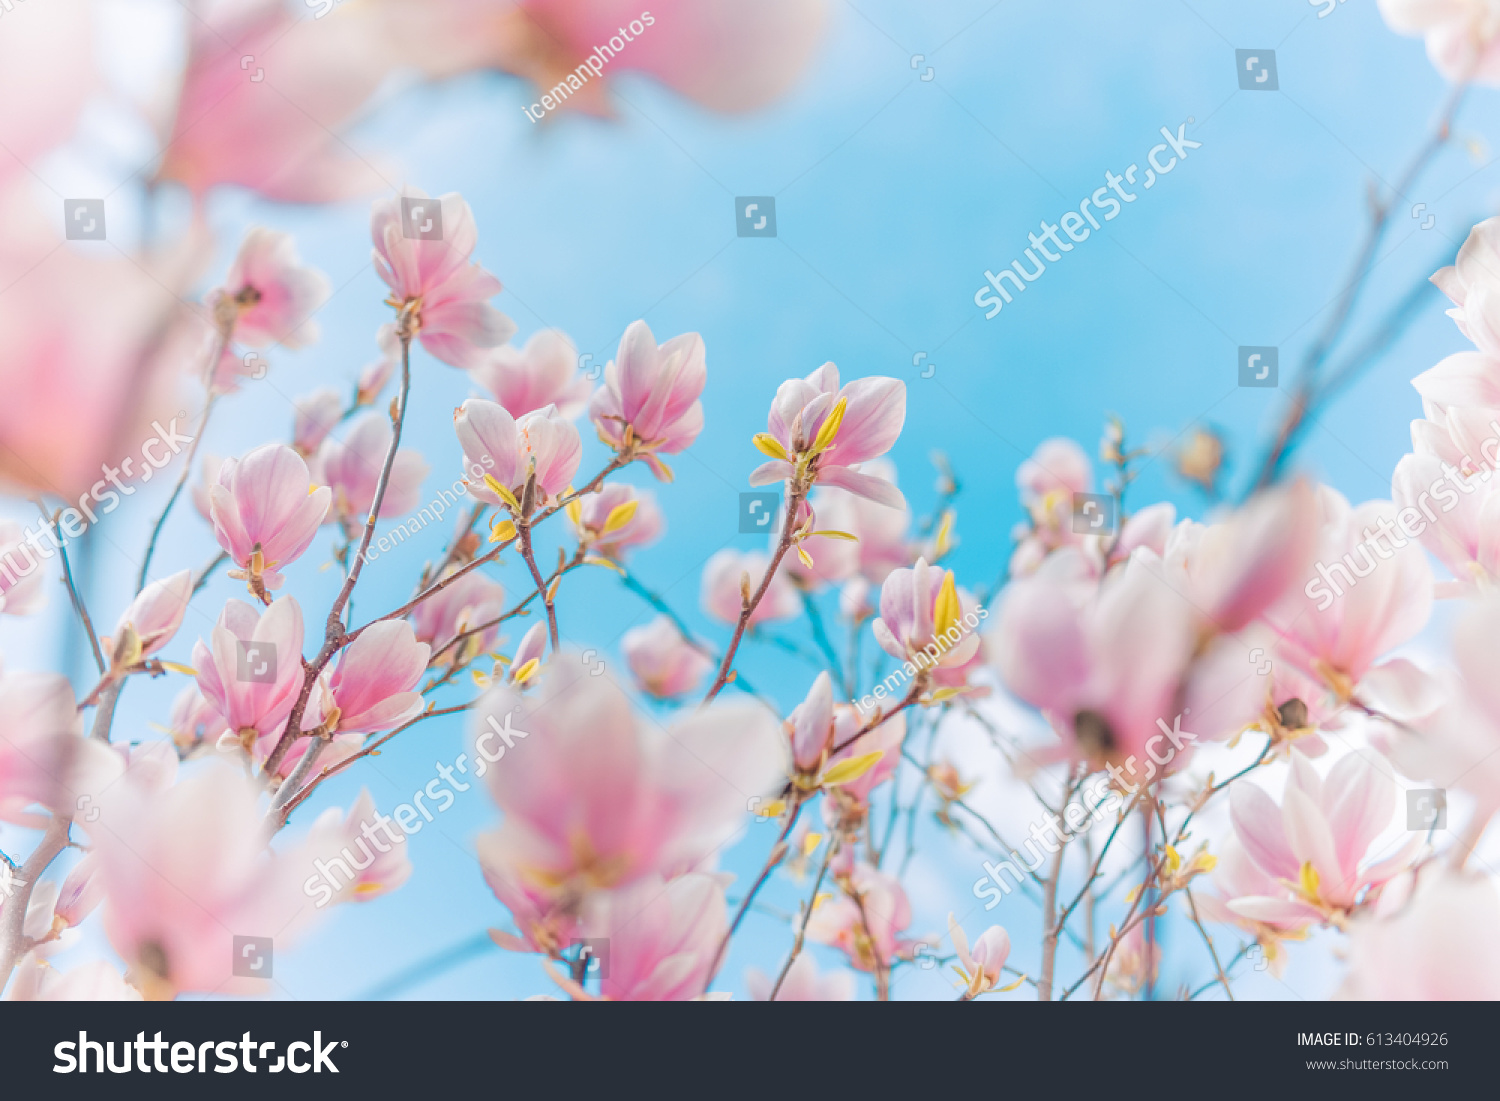 Perfect nature background for spring or summer background. Pink magnolia flowers and soft blue sky as relaxing moody closeup #613404926